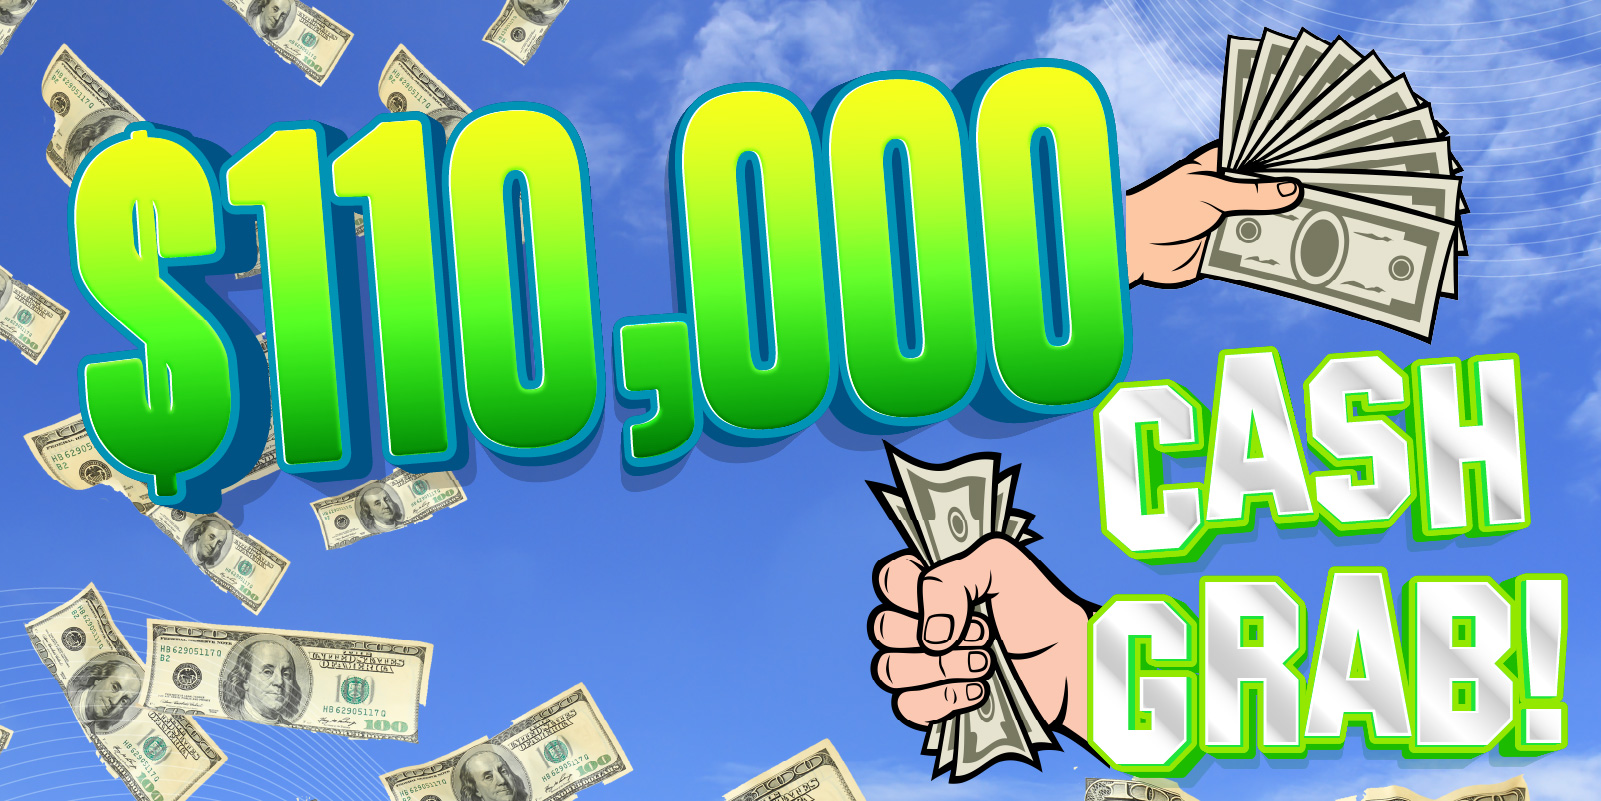 Enter the $110,000 Cash Grab Contest and Seize Your Chance at Big Bucks